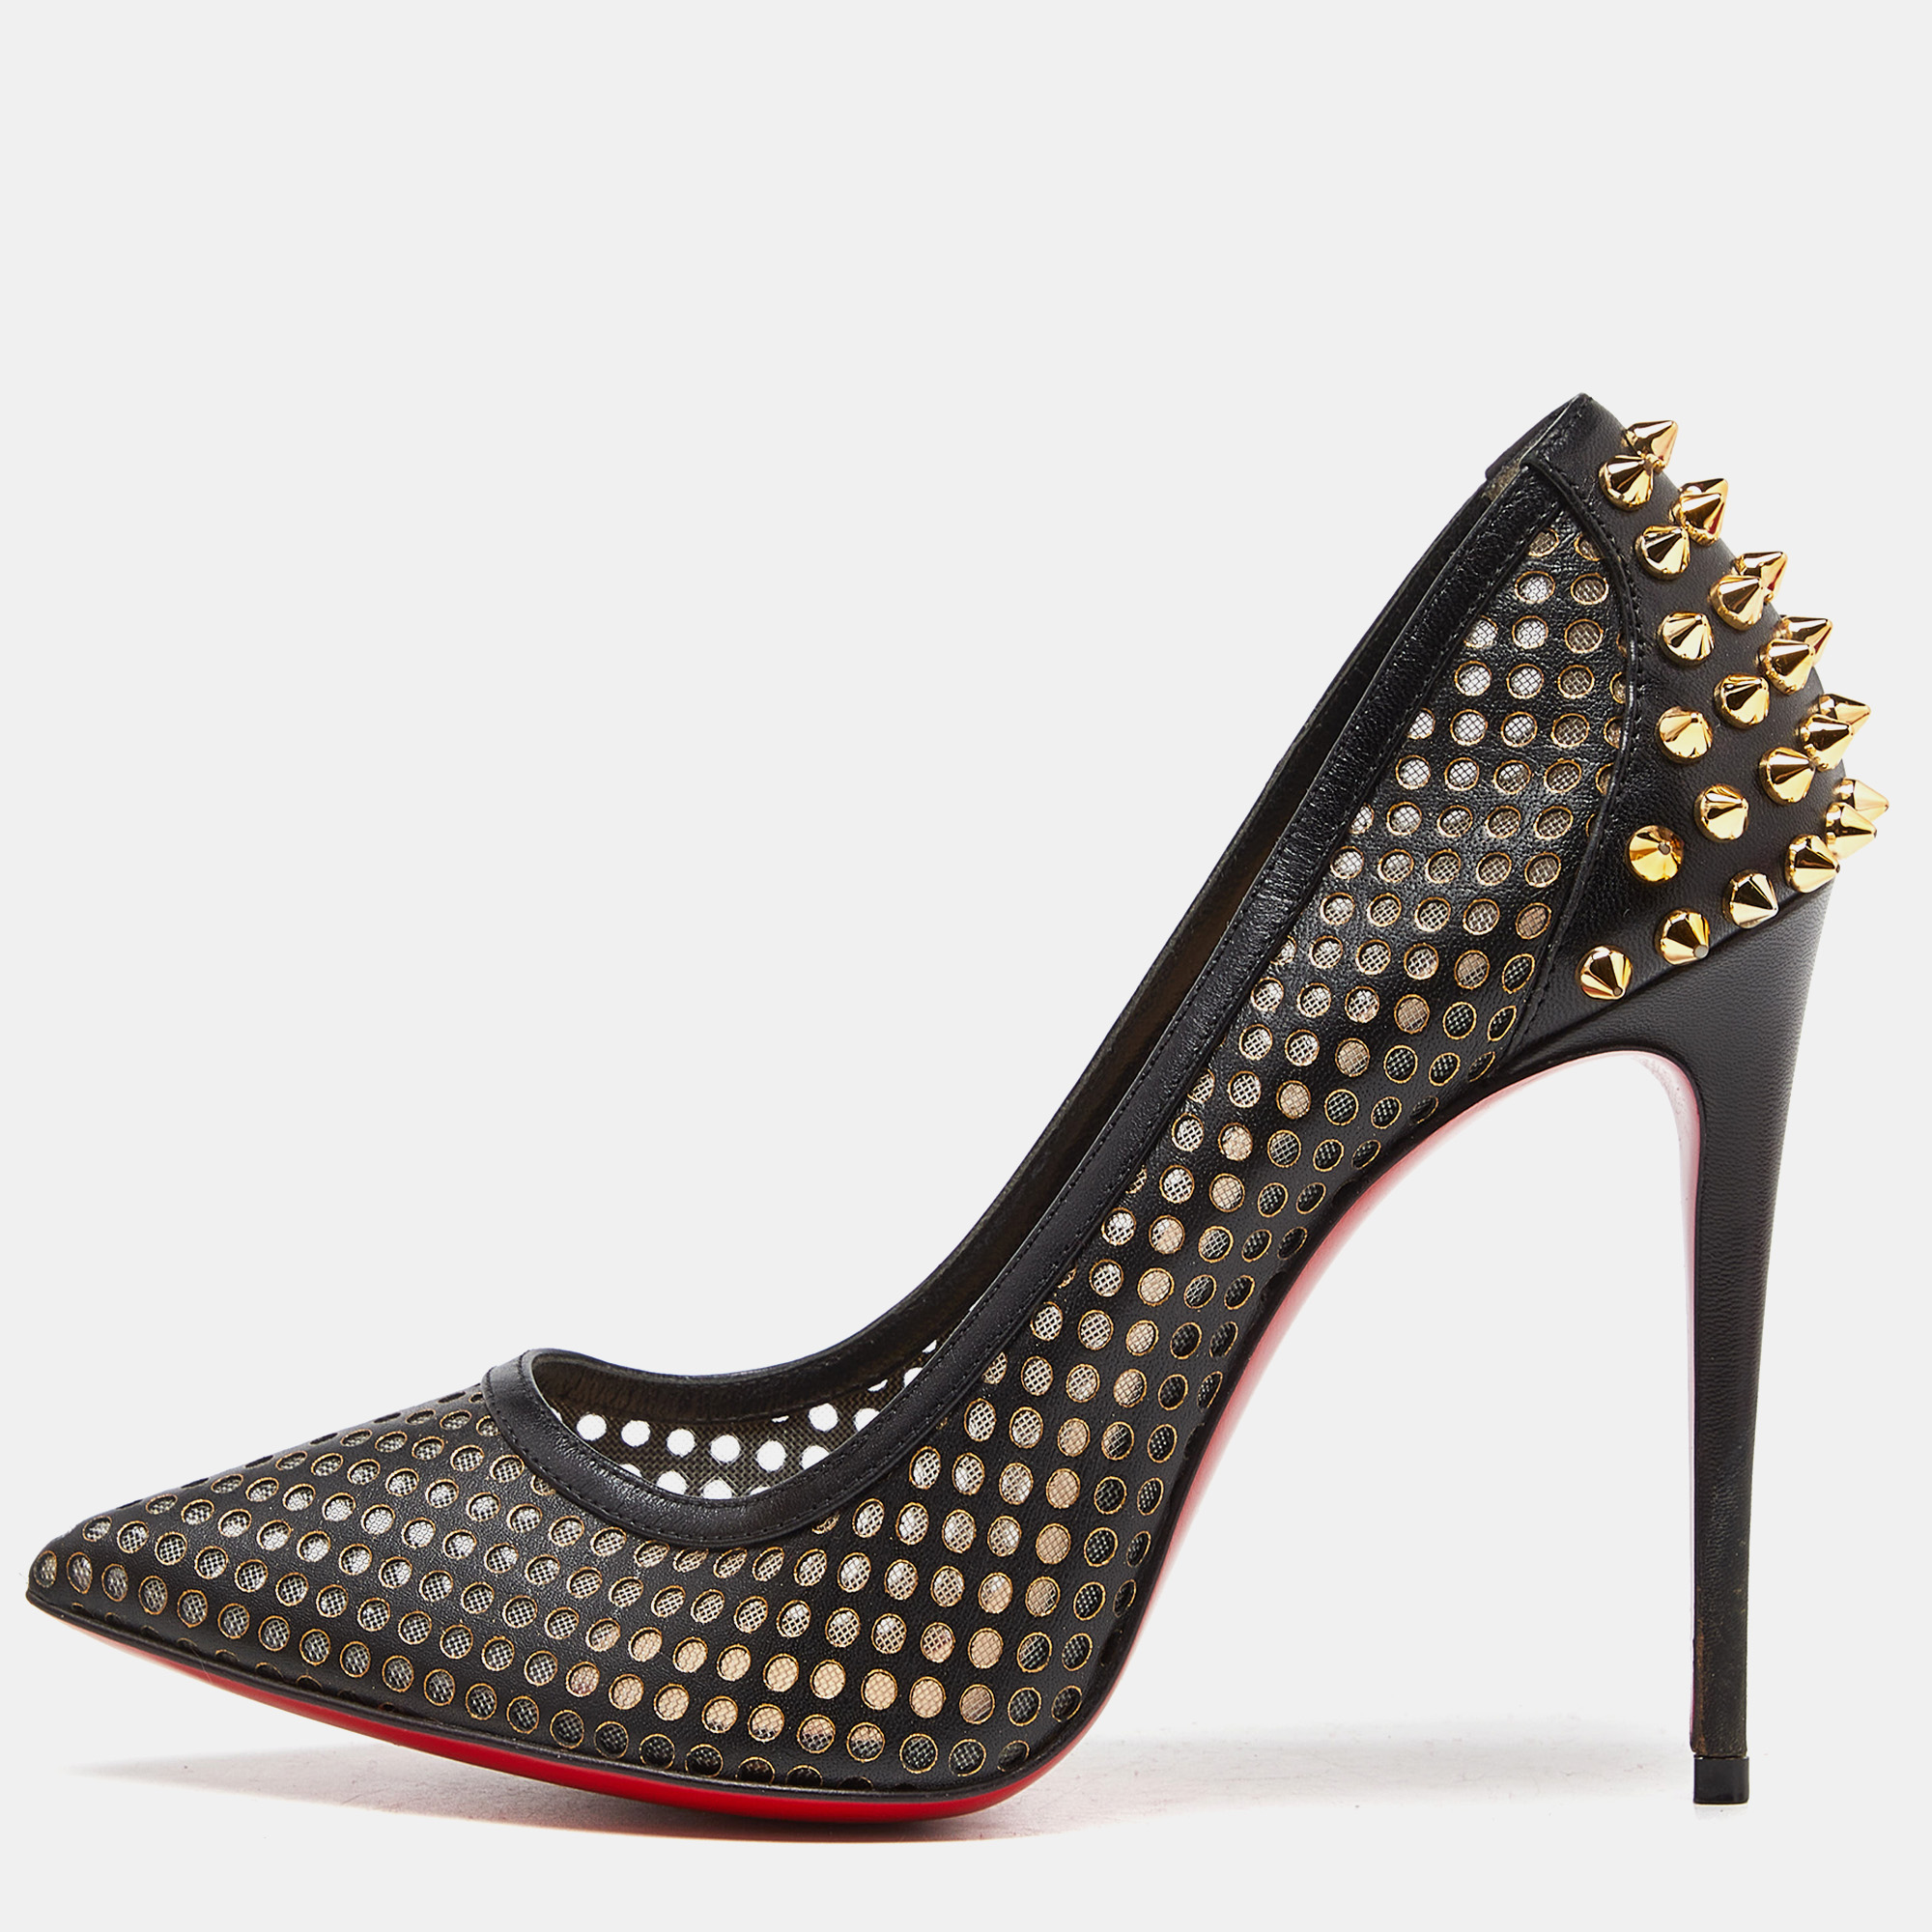 Christian louboutin black perforated leather spiked guni pumps size 37